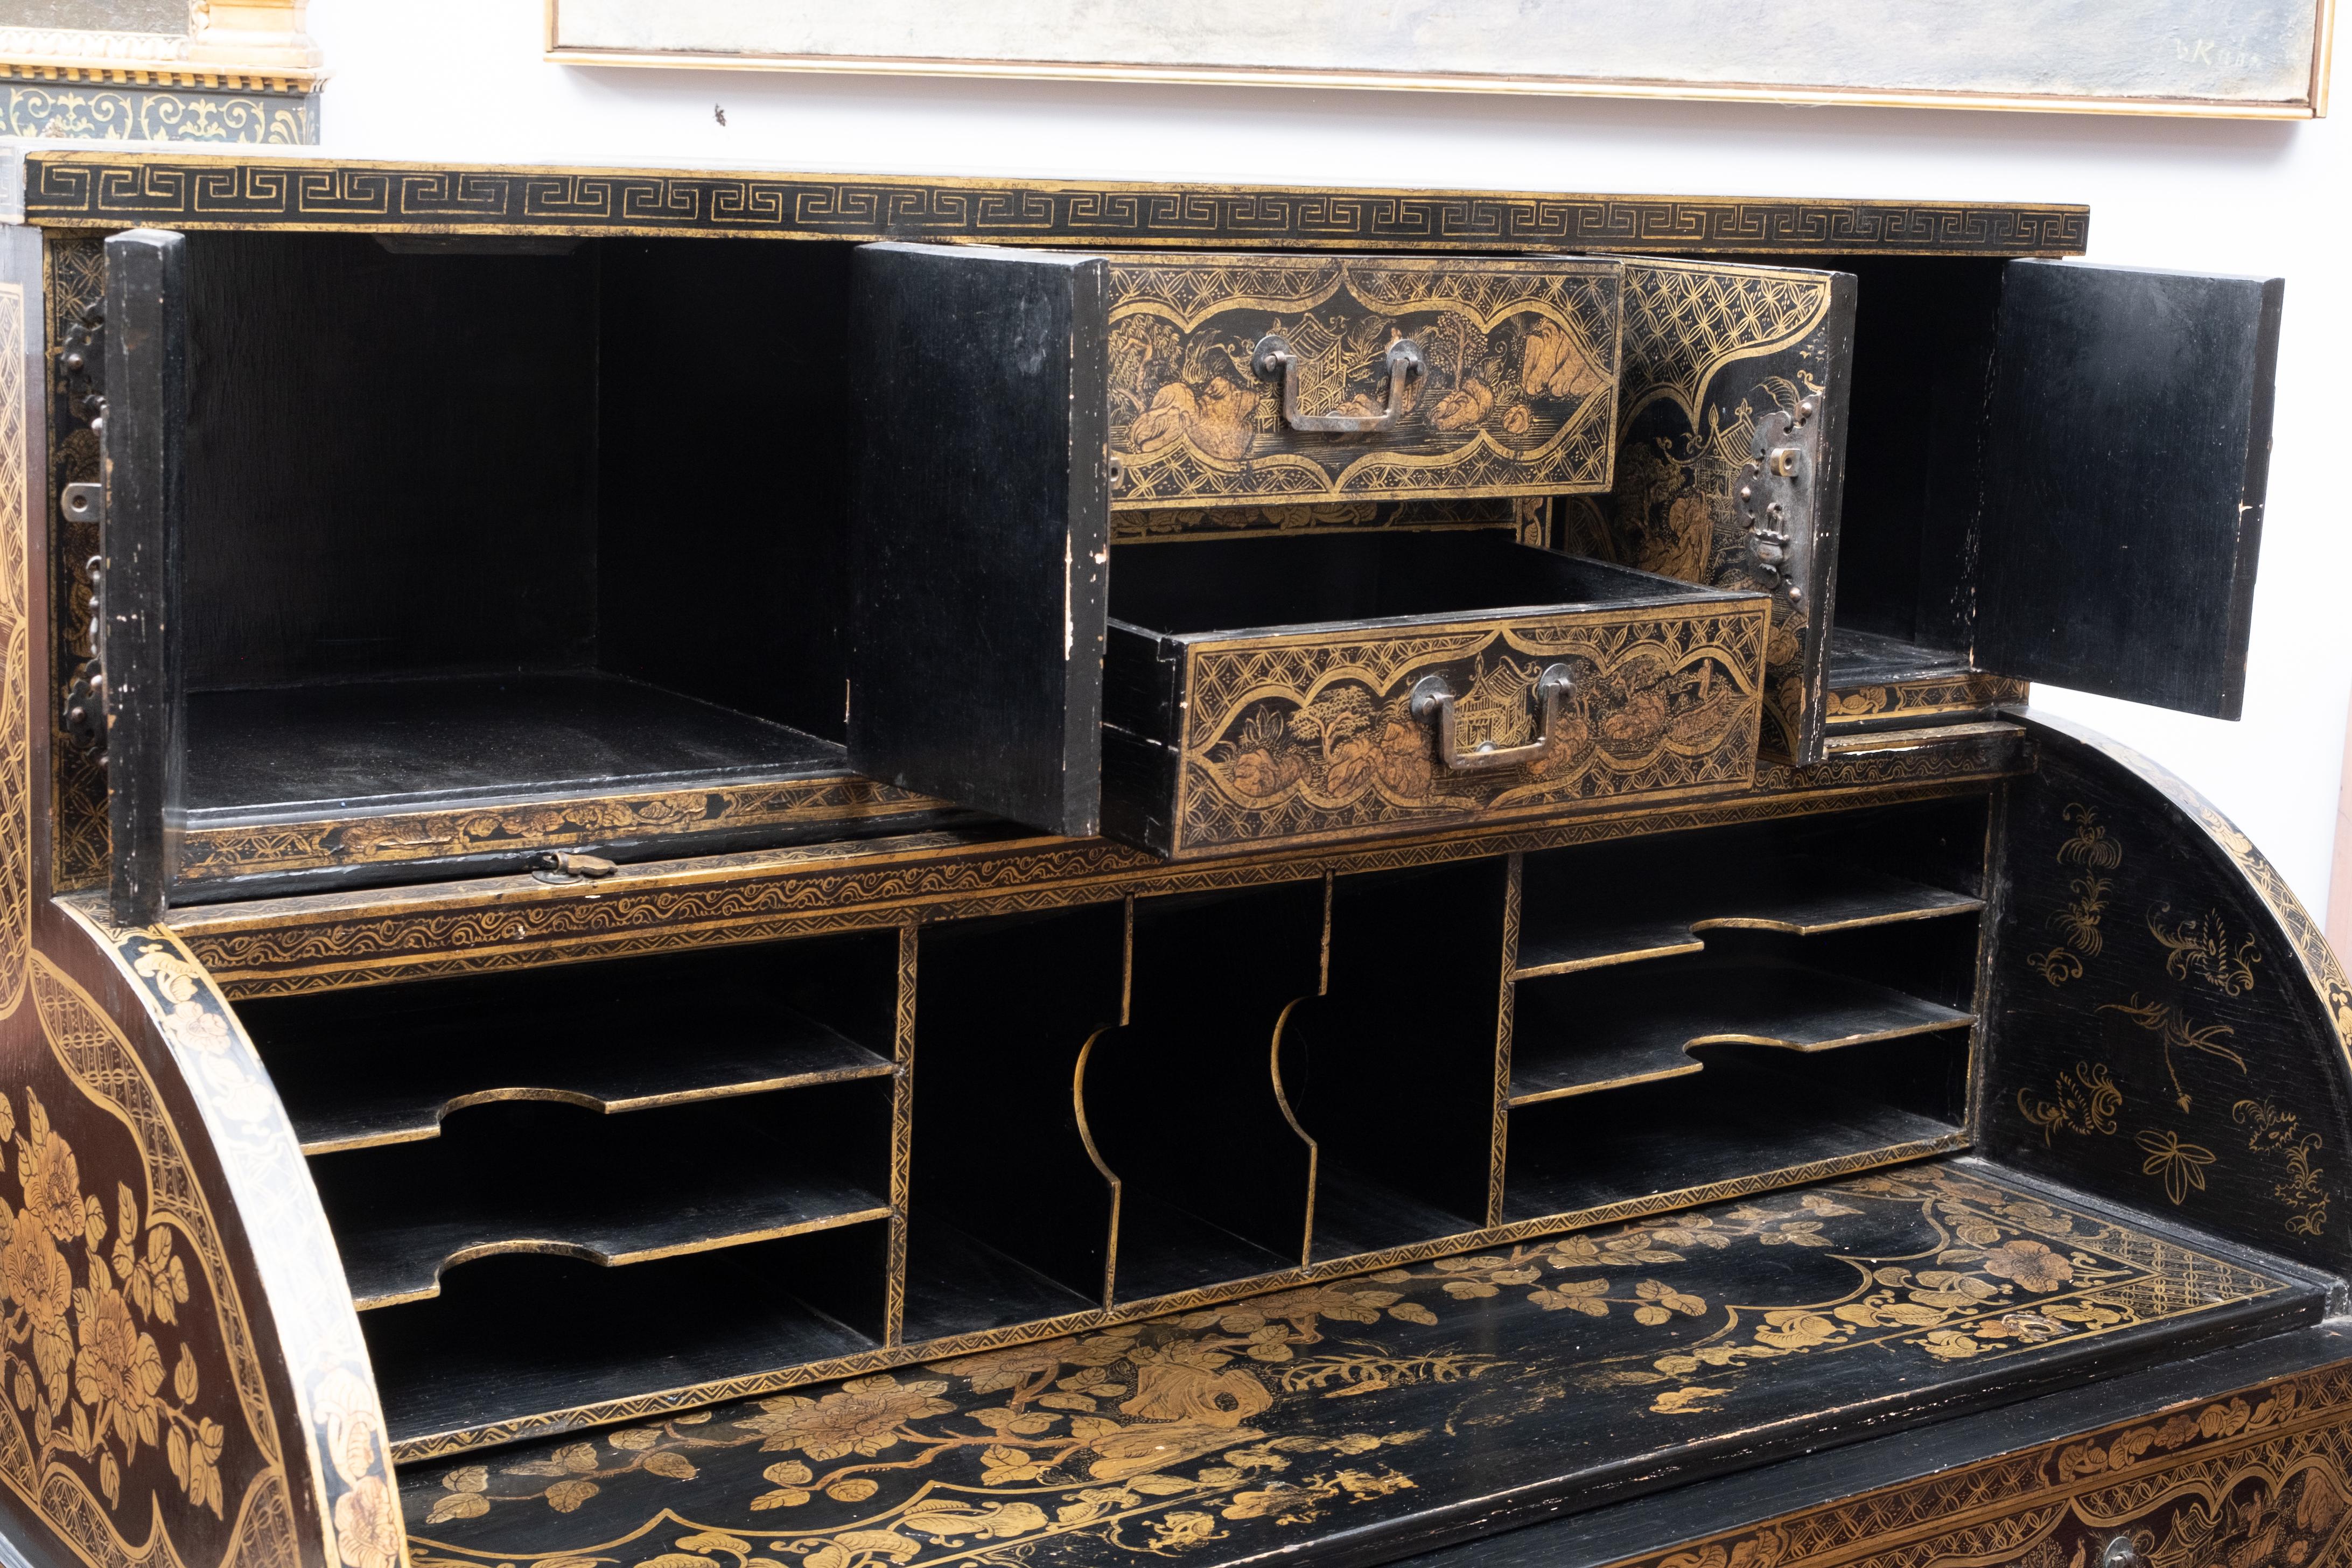 20th Century Chinese Export Gilt Black Lacquer Cylinder Roll Desk and Chair, 19th/20th C.